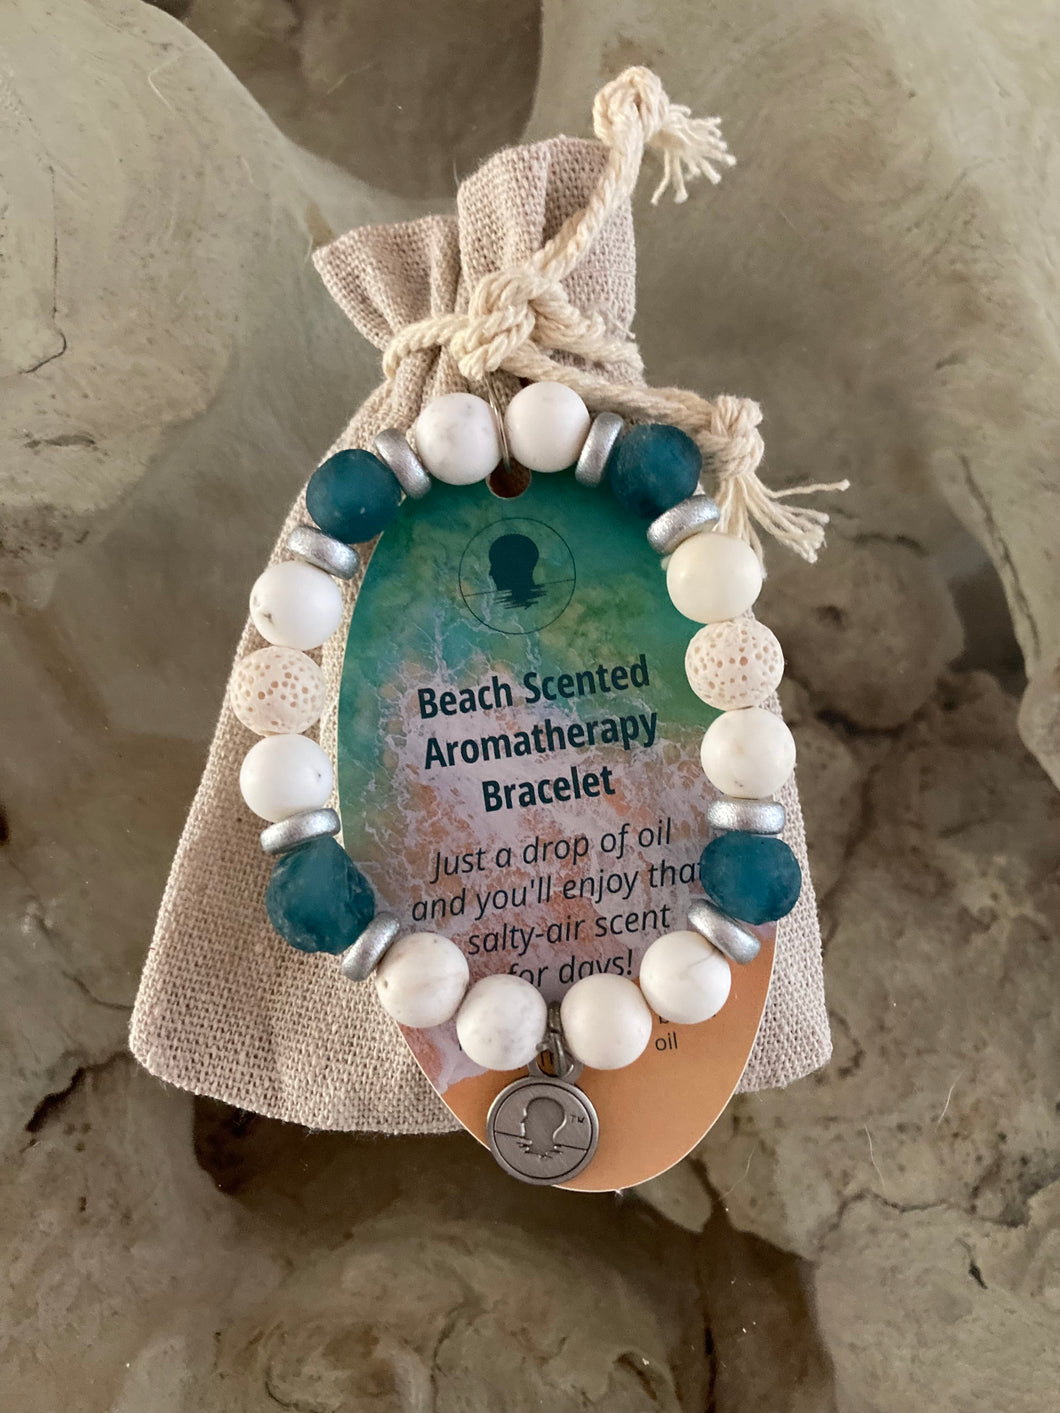 Sea Glass Collection - Ocean Teal - Beach Scented Aromatherapy Bracelet with Silver Accents